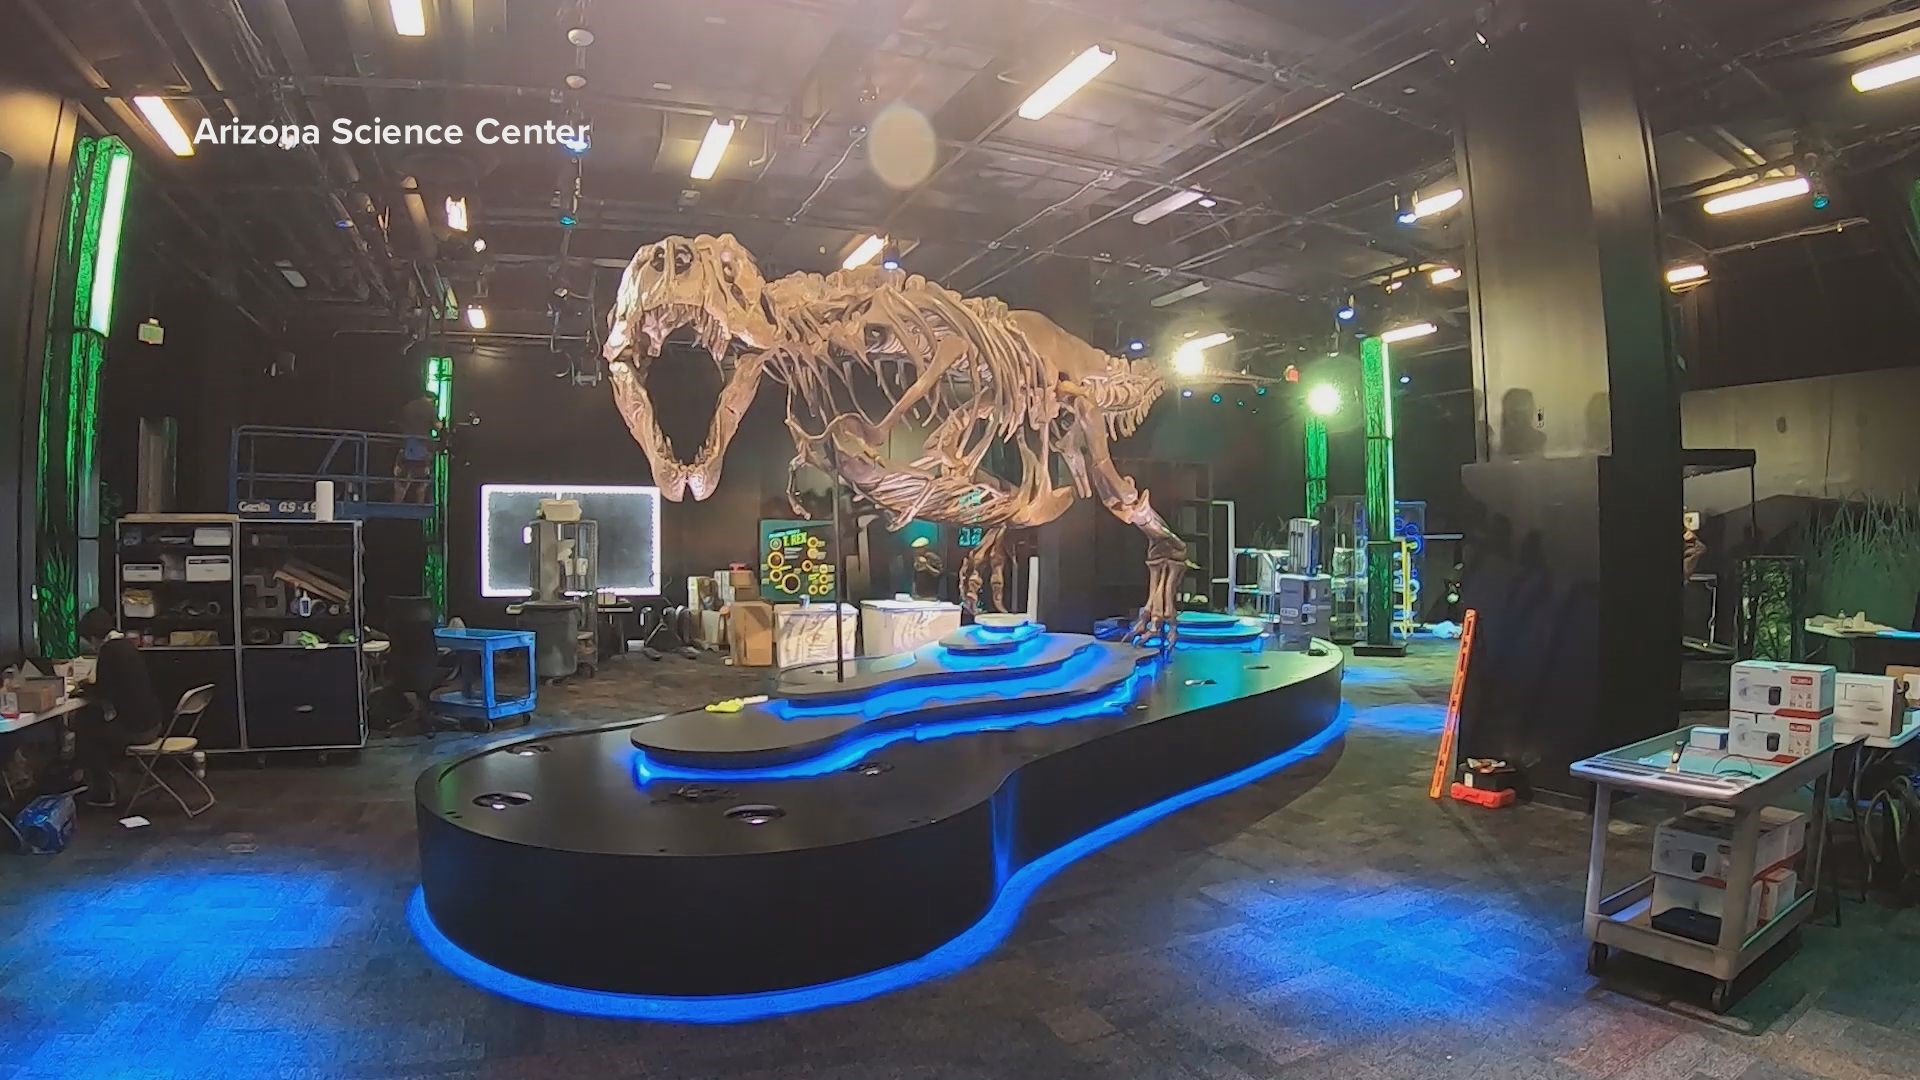 Victoria the T. Rex has come to the Valley! Watch this time-lapse video of her being put together at the Arizona Science Center.